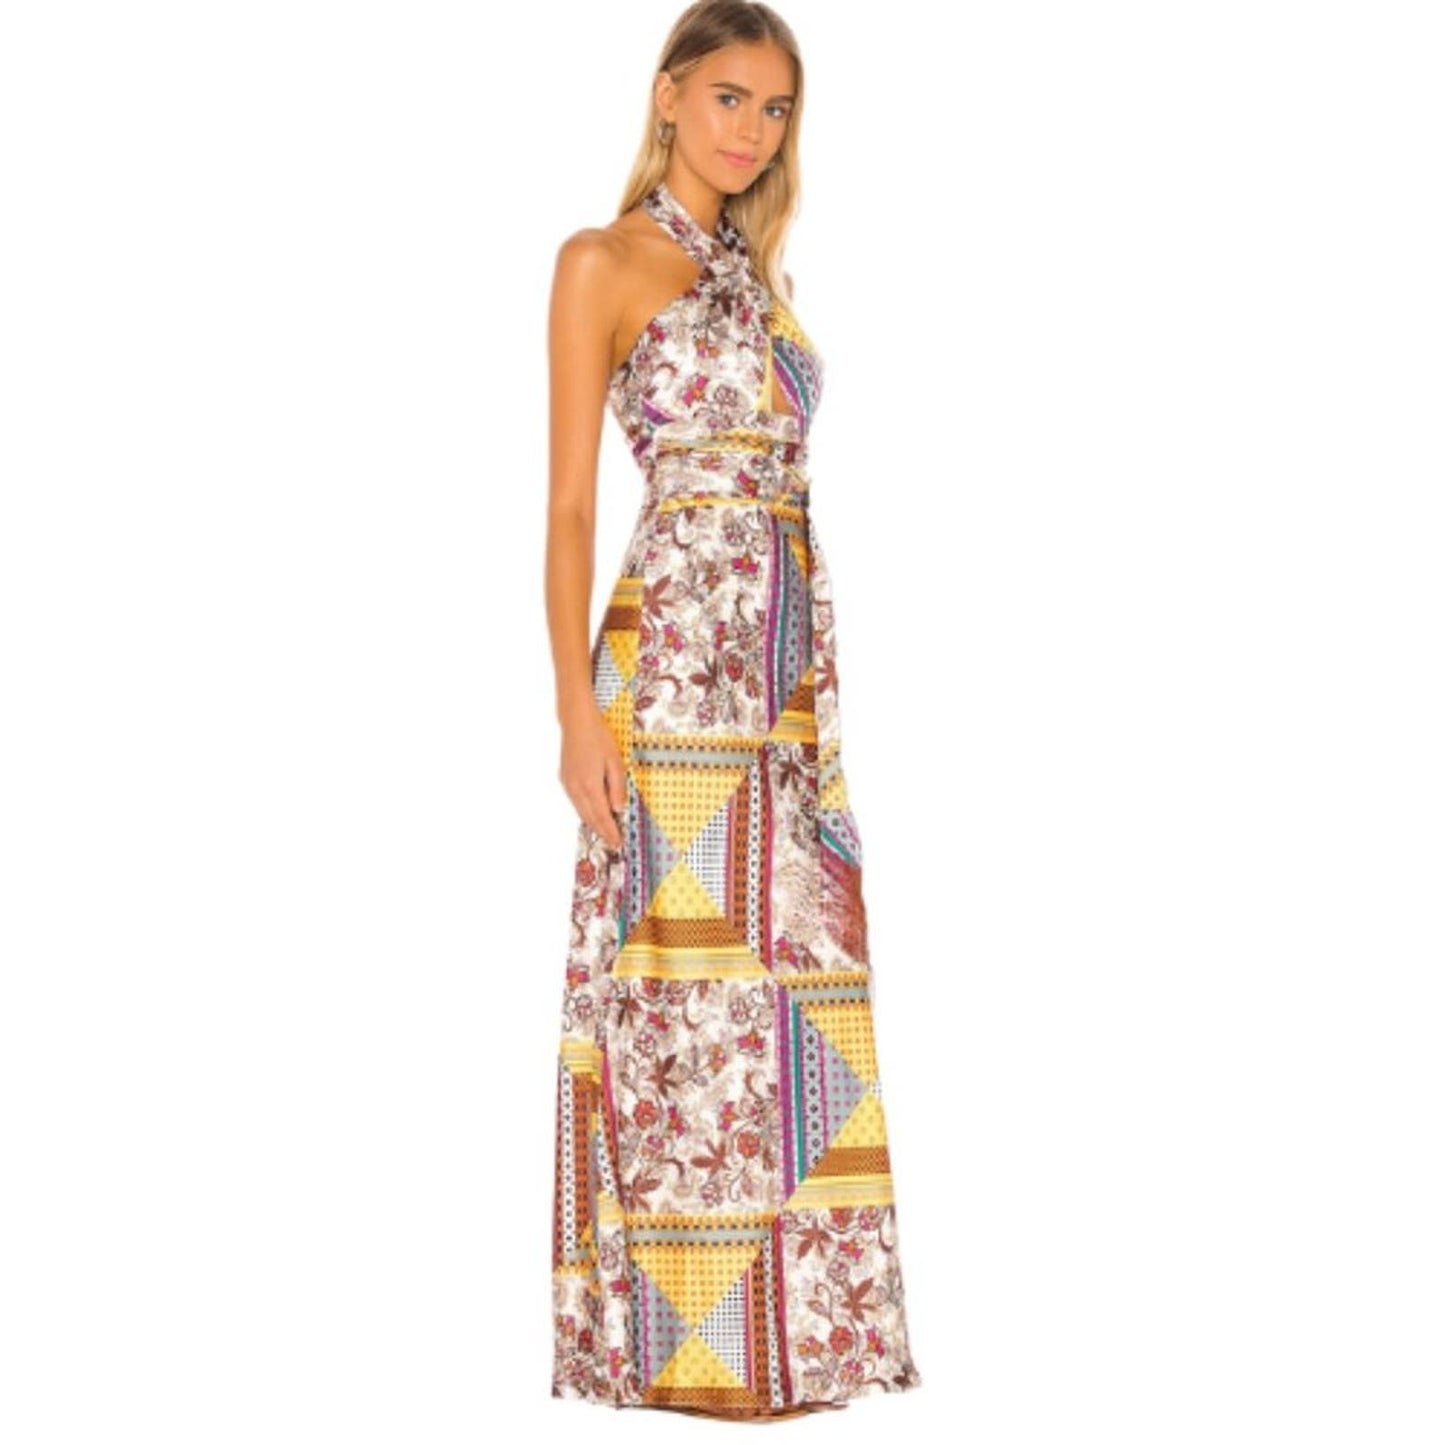 House of Harlow 1960 x REVOLVE Tianna Maxi Dress in Patchwork Multi NWT …